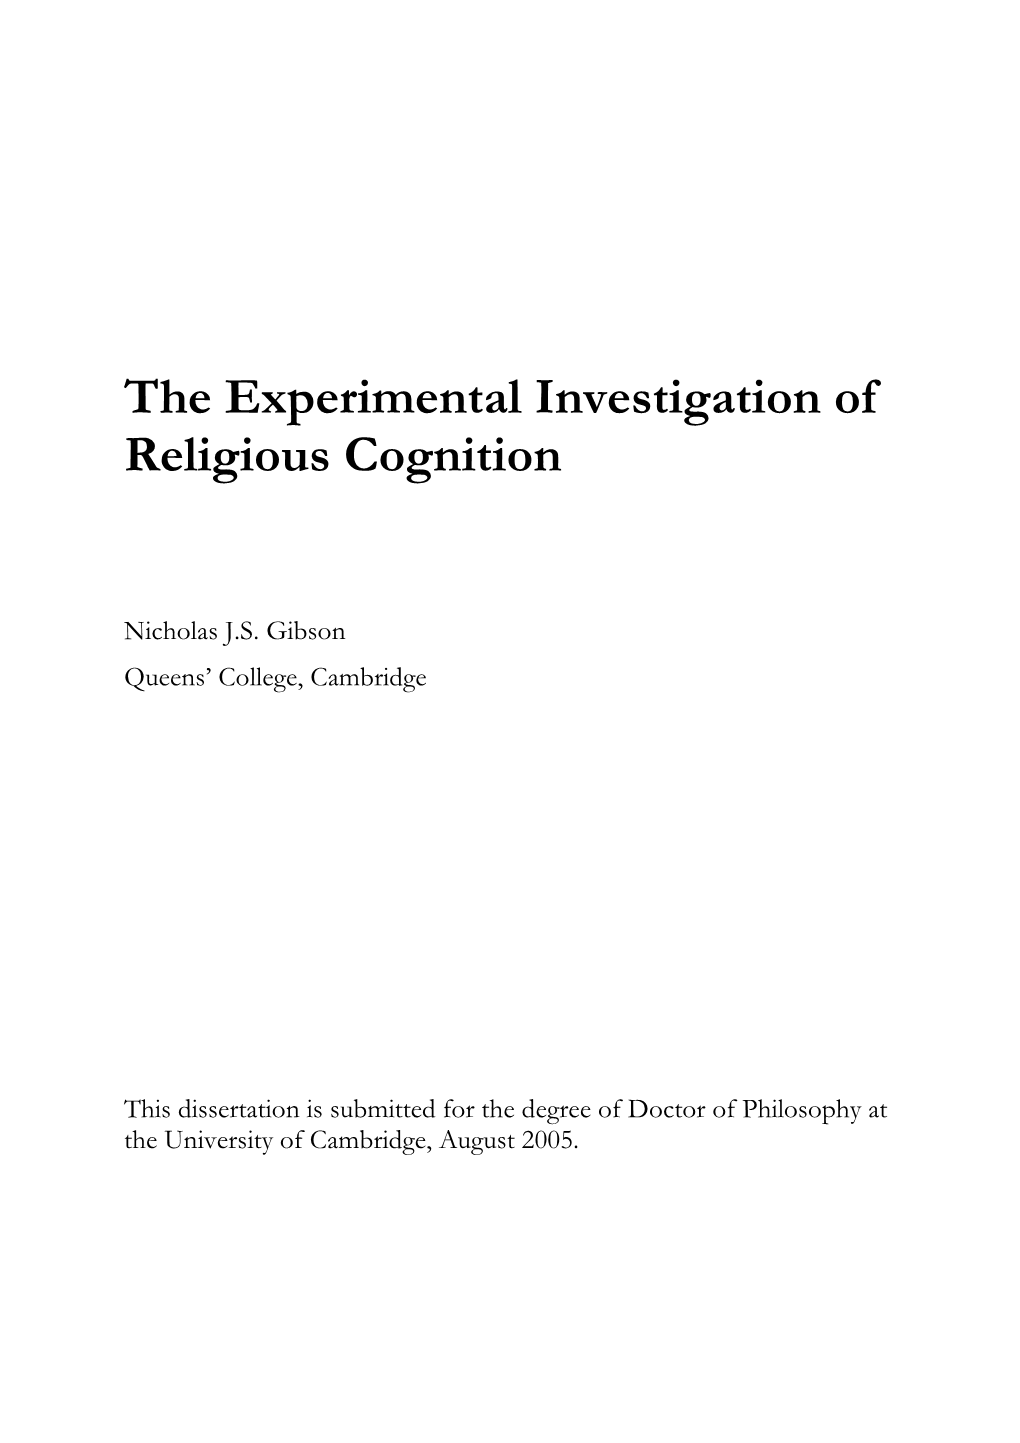 The Experimental Investigation of Religious Cognition